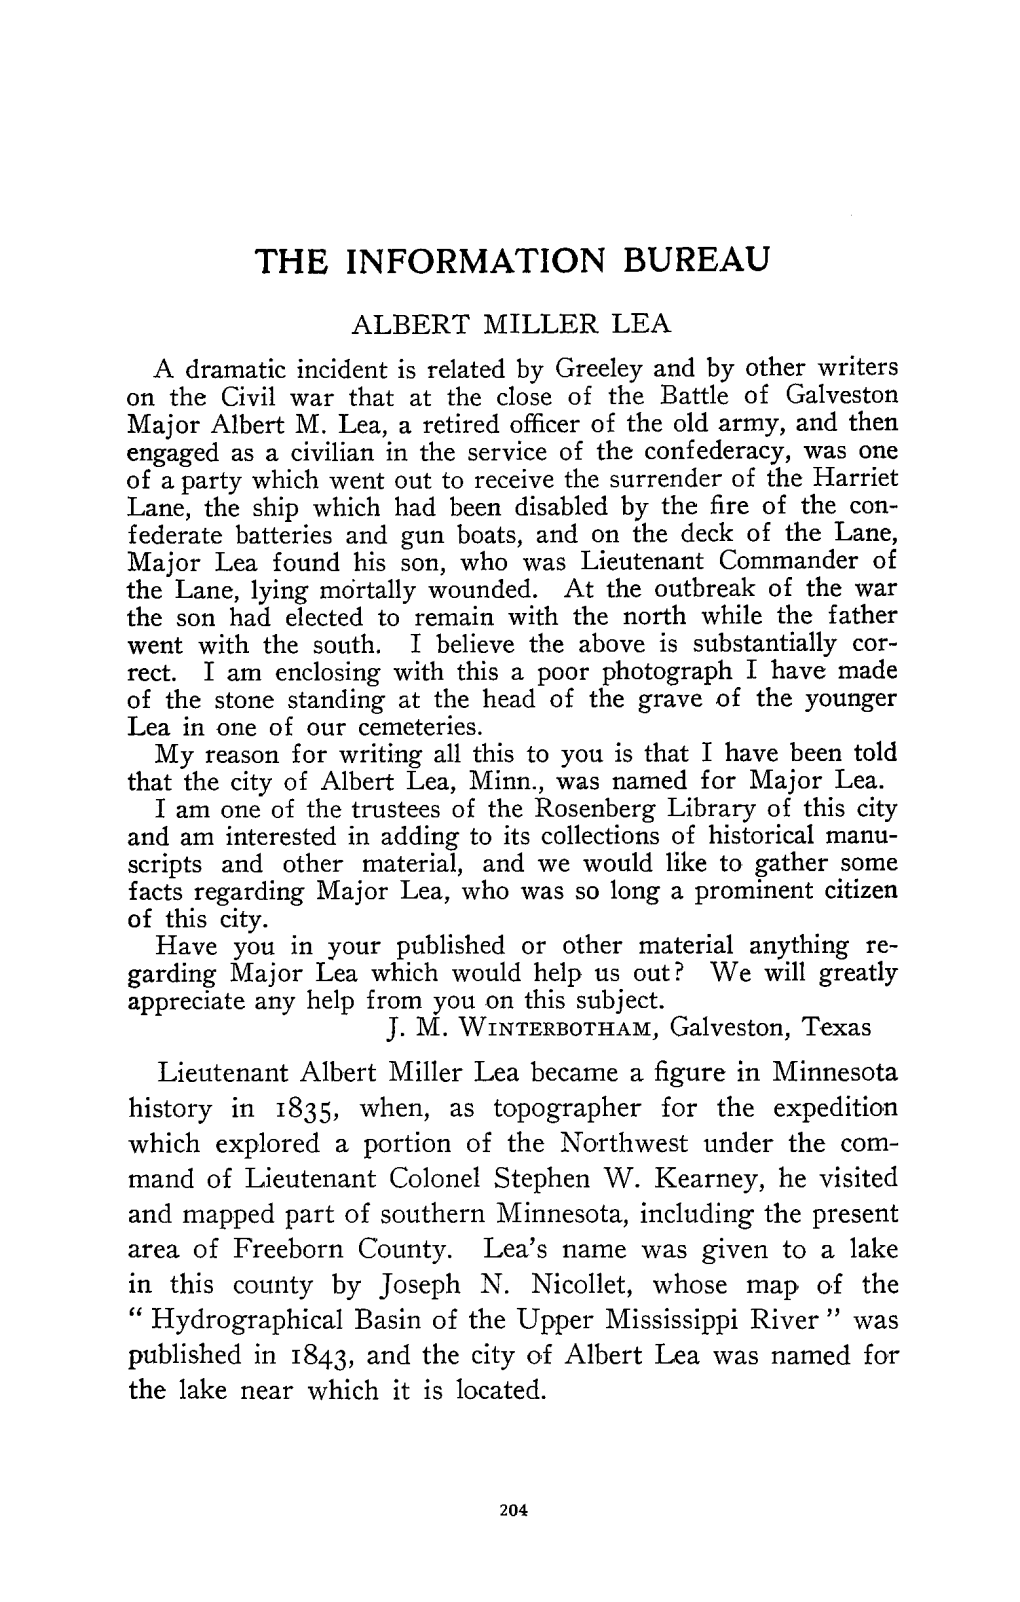 ALBERT MILLER LEA a Dramatic Incident Is Related by Greeley and by Other Writers on the Civil War That at the Close of the Battle of Galveston Major Albert M